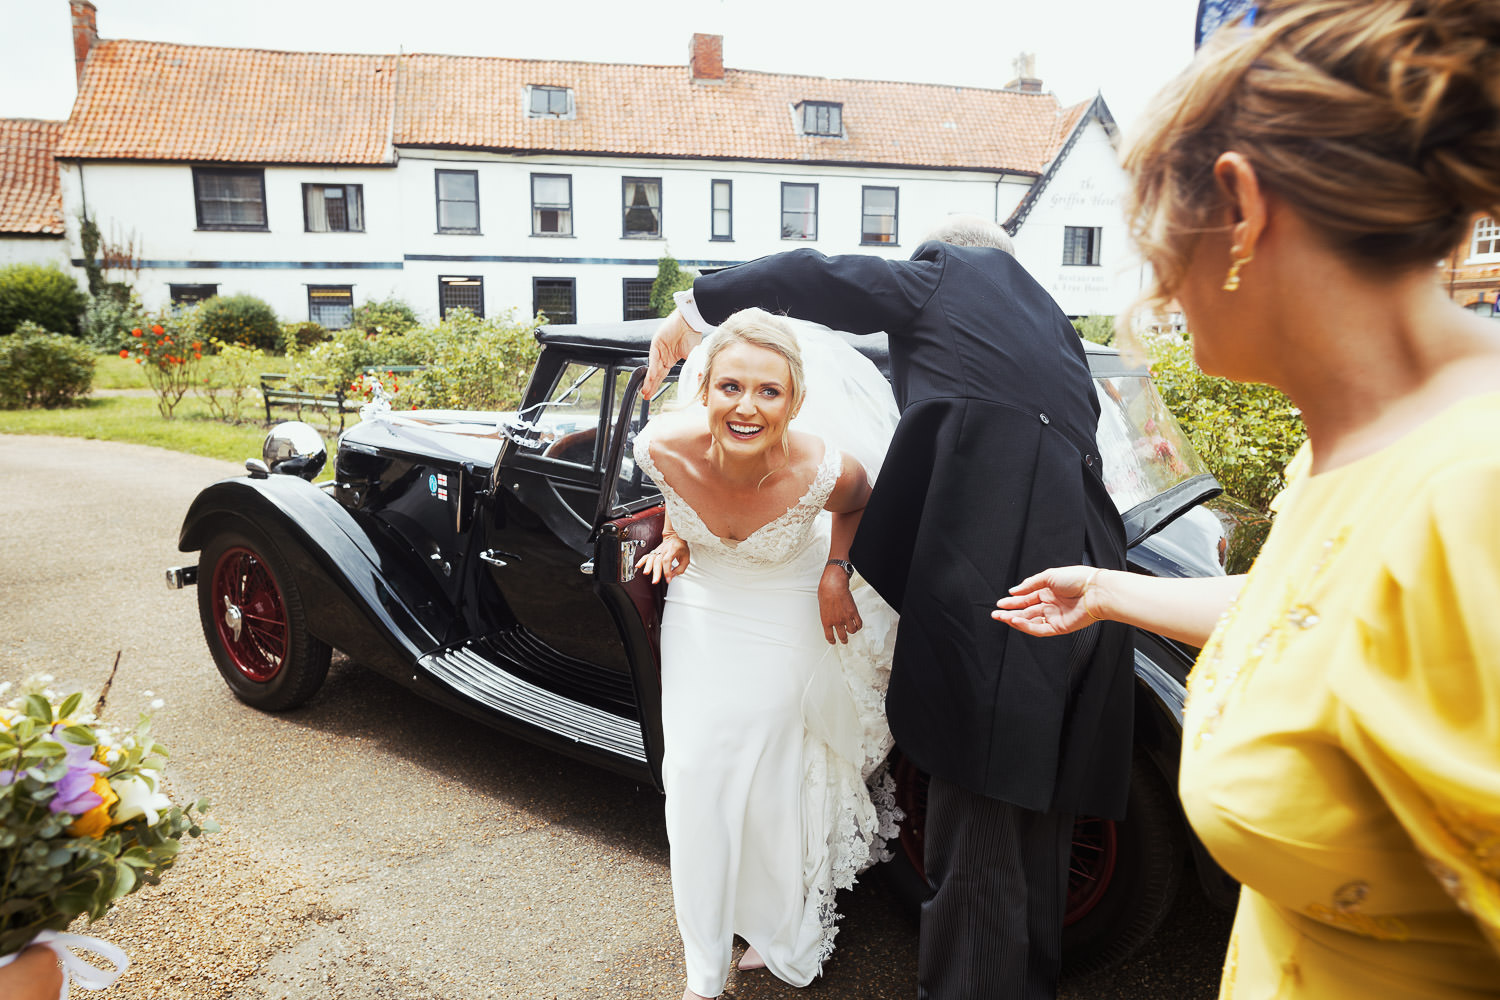 Bride getting out of the car, a 1938 Riley, for her wedding at St Mary's church in Attleborough.